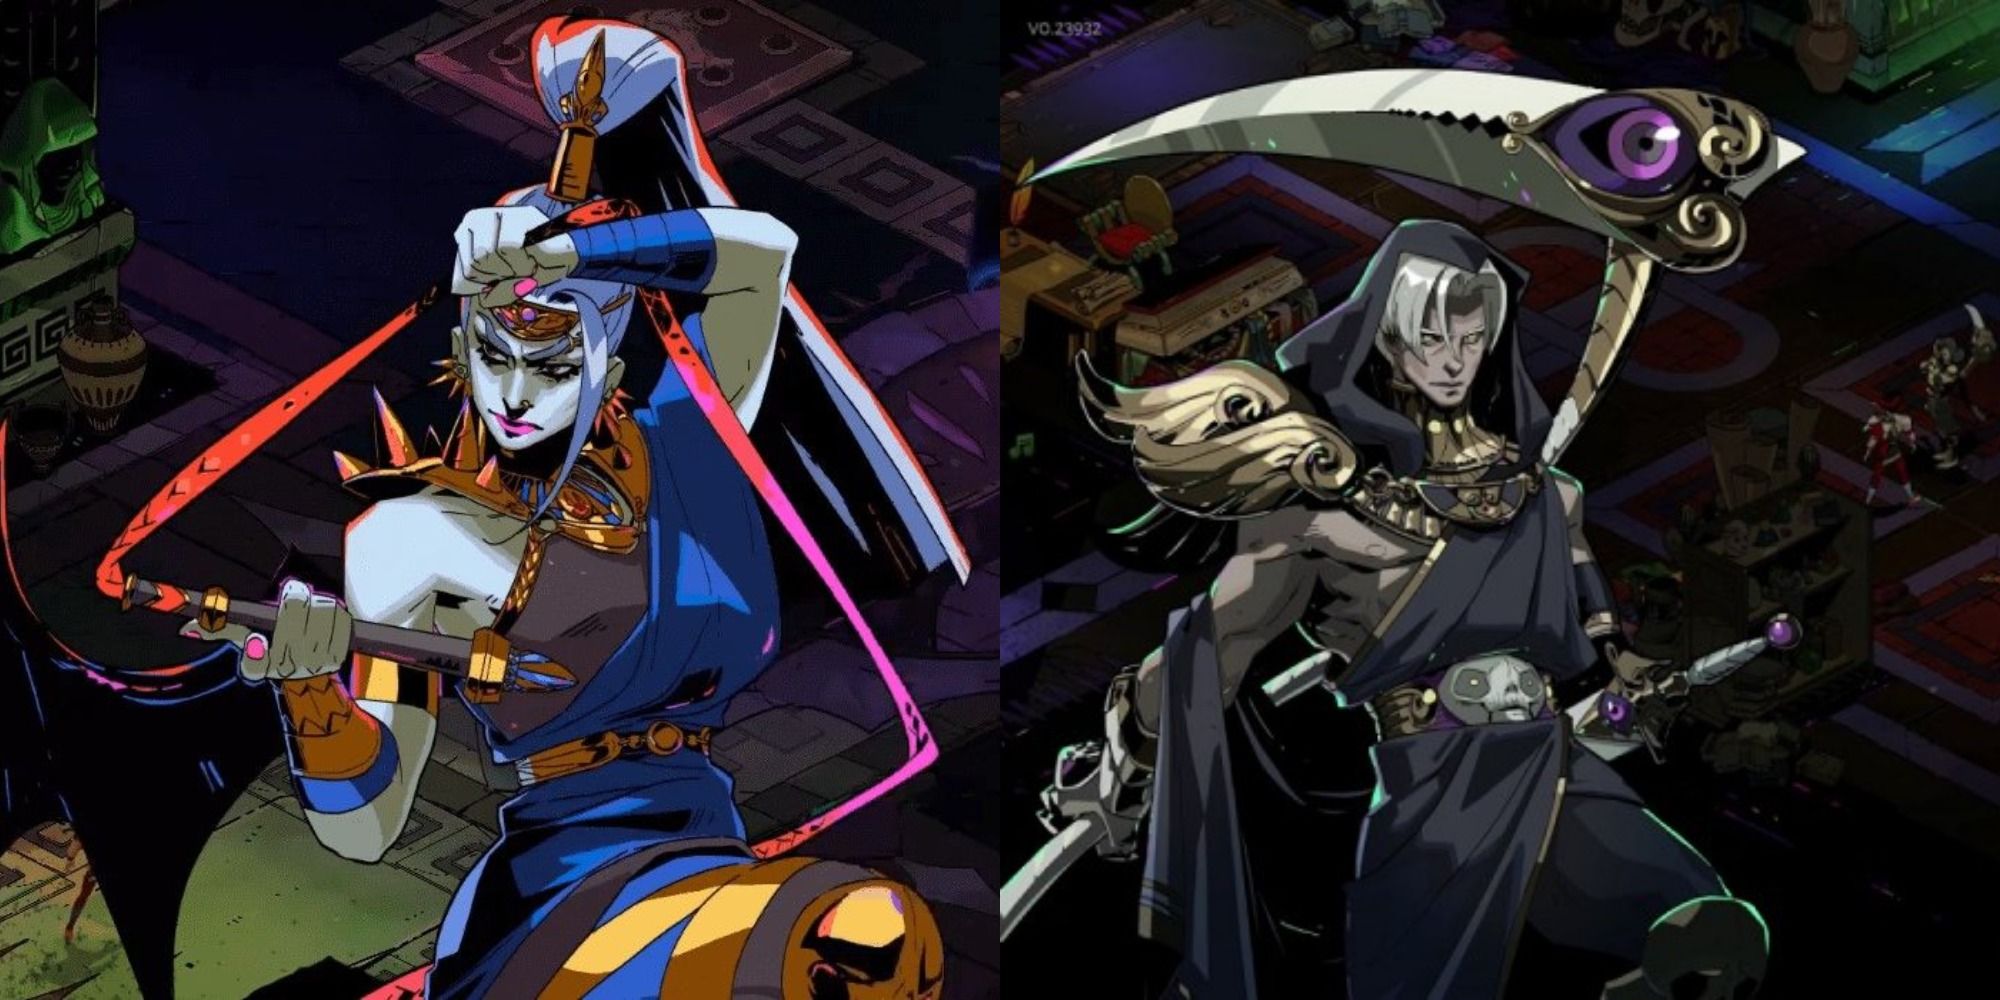 A split image of Megaera and Thanatos in Hades video game